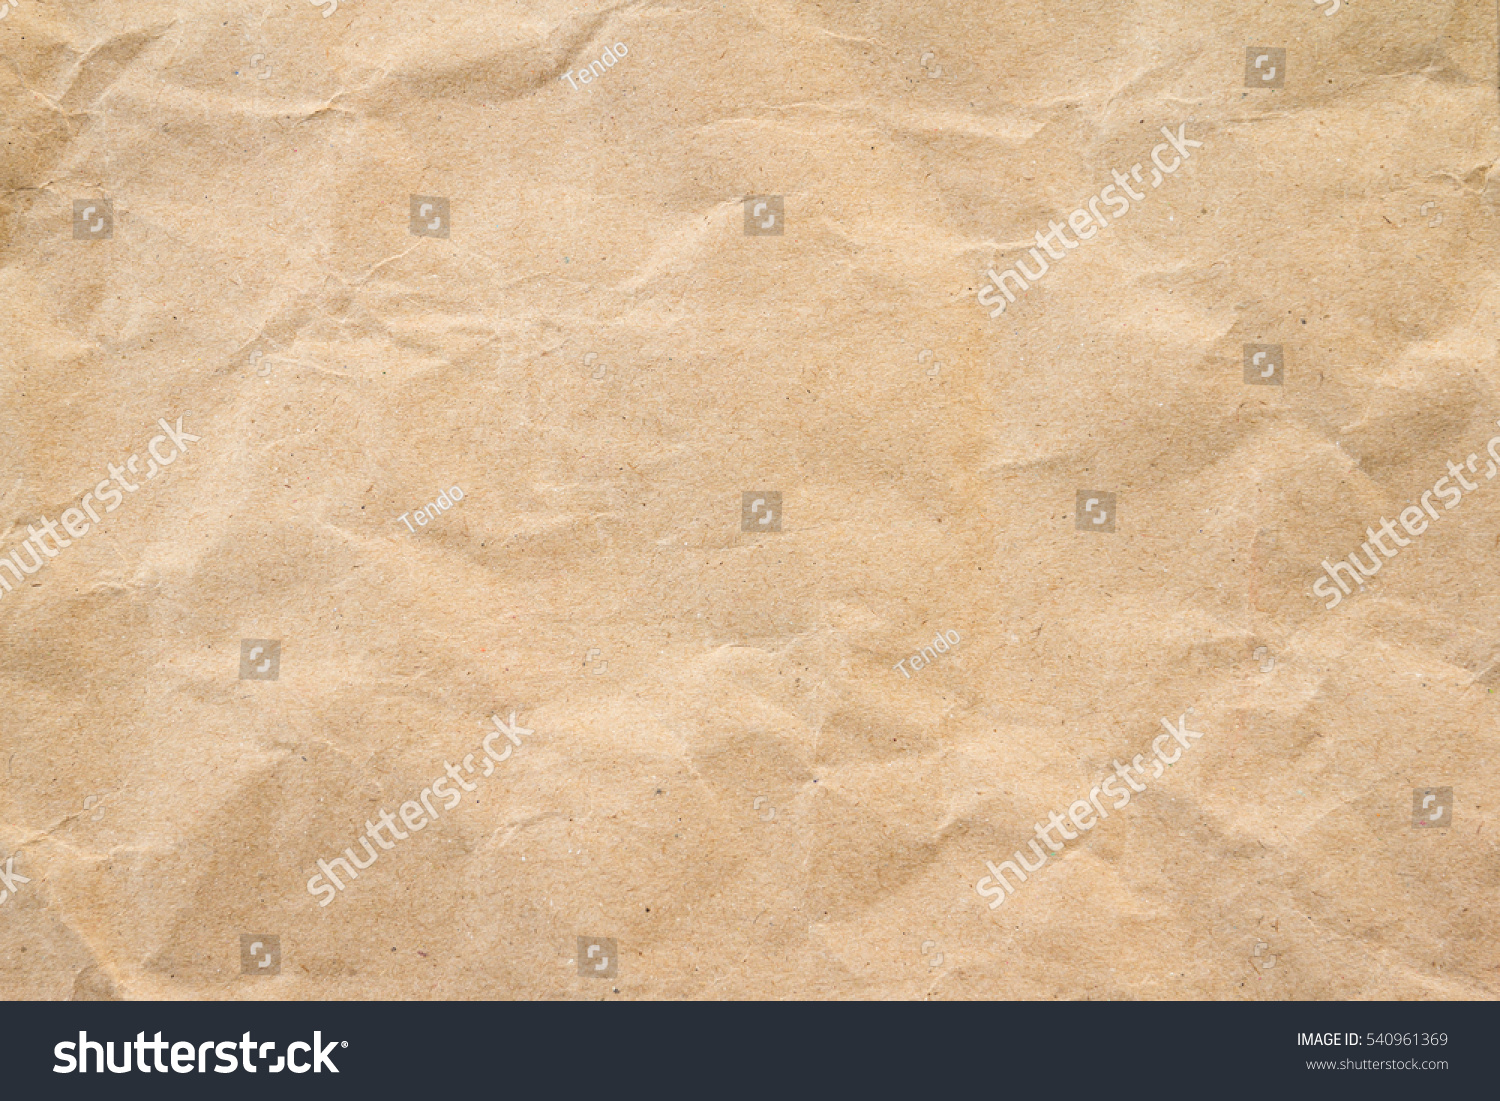 Brown wrinkle recycle paper background #540961369